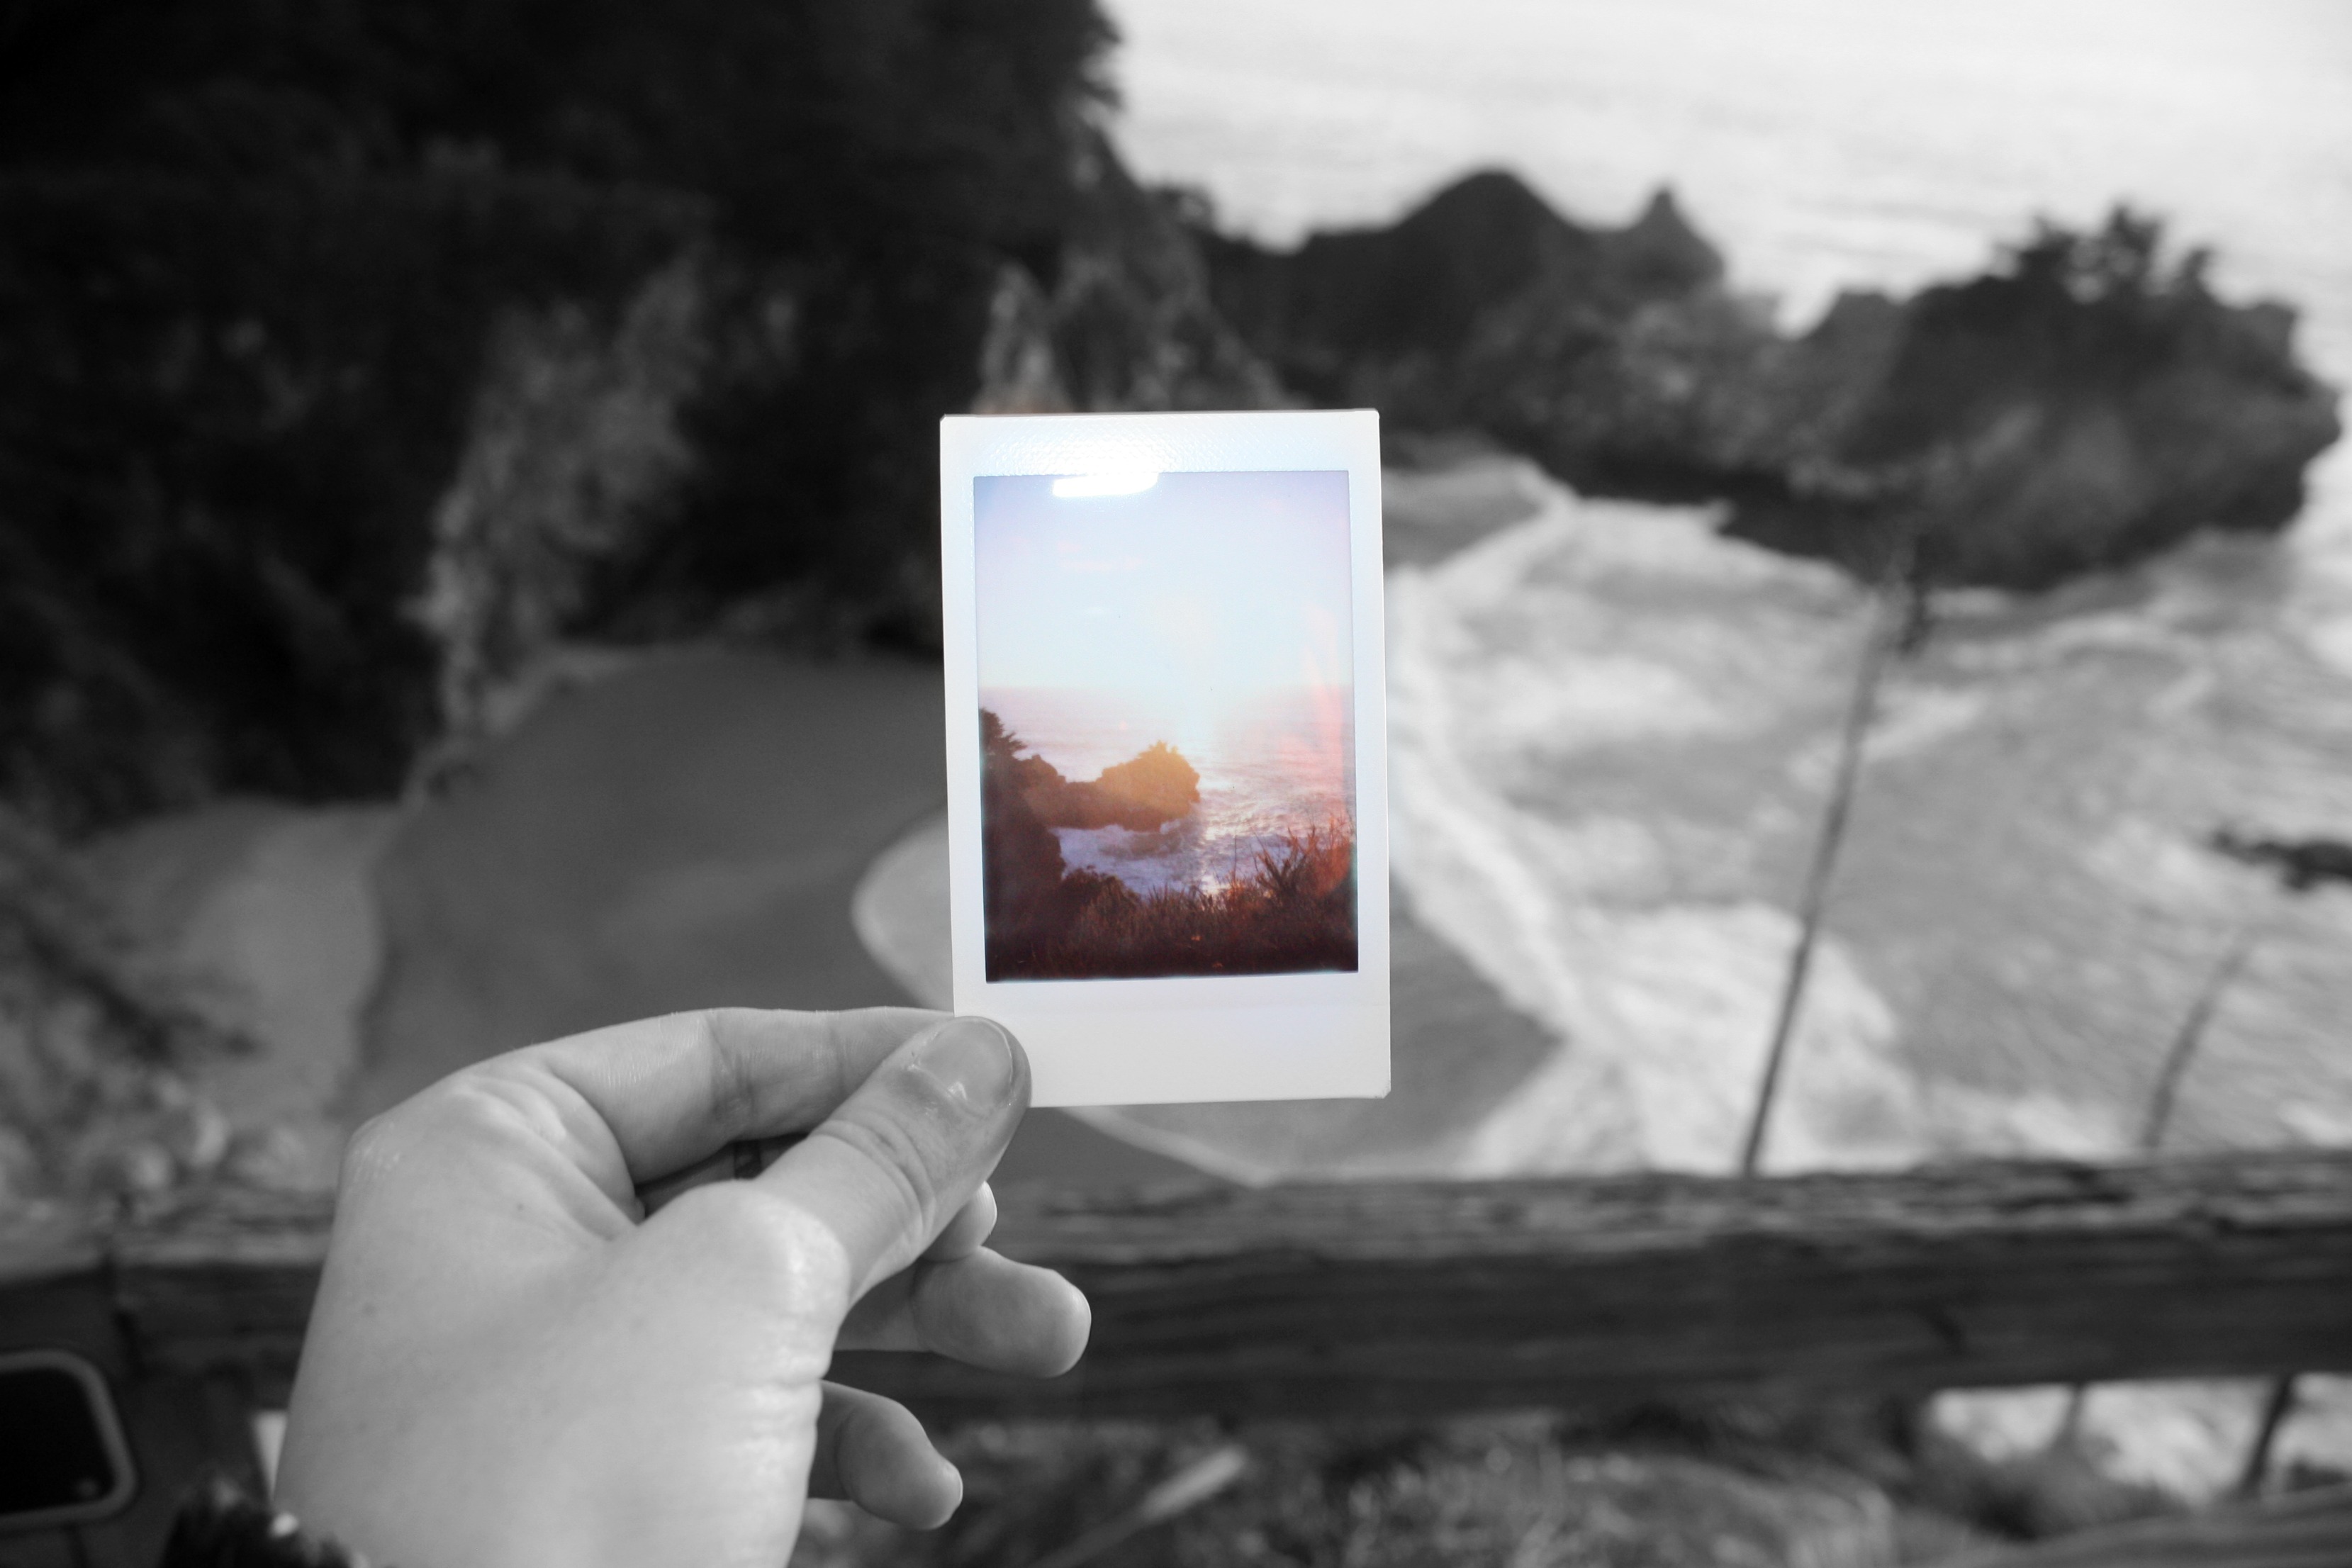 Day dreaming about vacation, procrastination at its finest. Picture taken at Big Sur CA. -Kari Jensen  